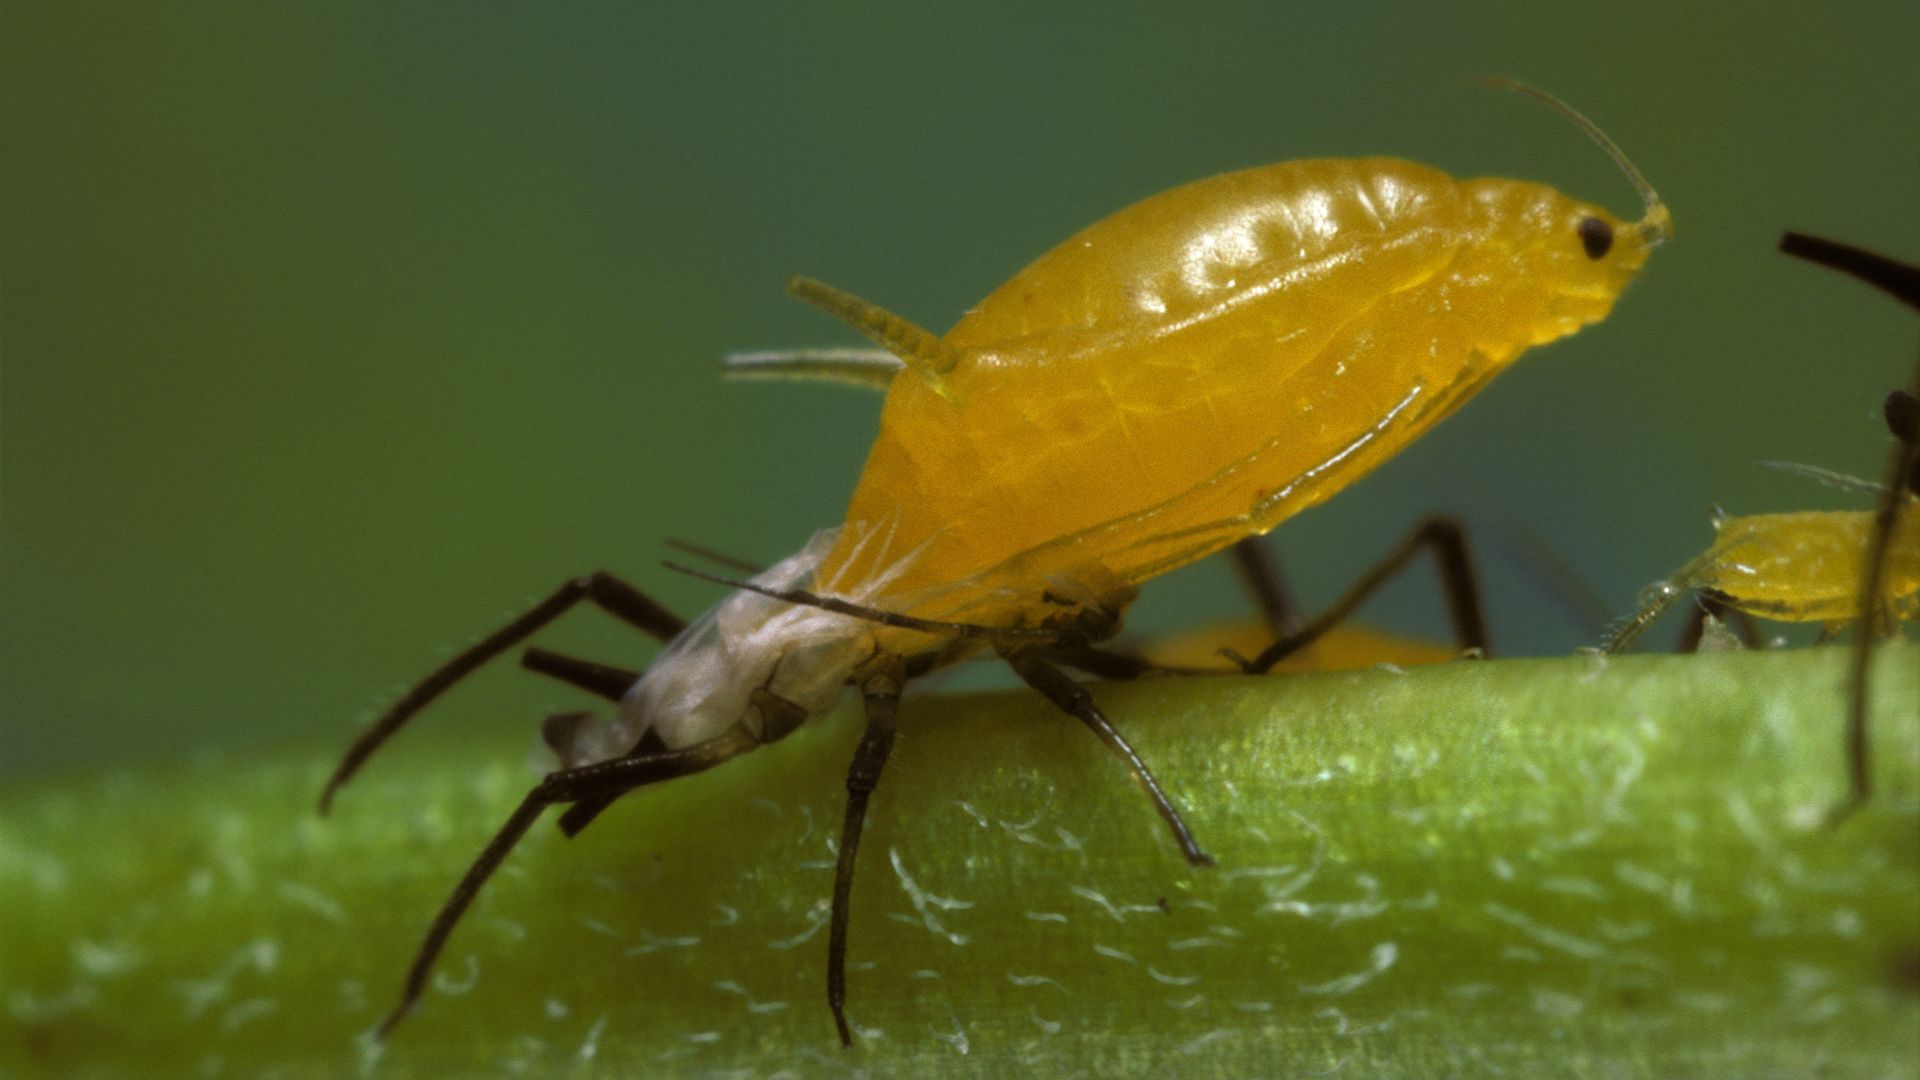 A small yellow bug on something green